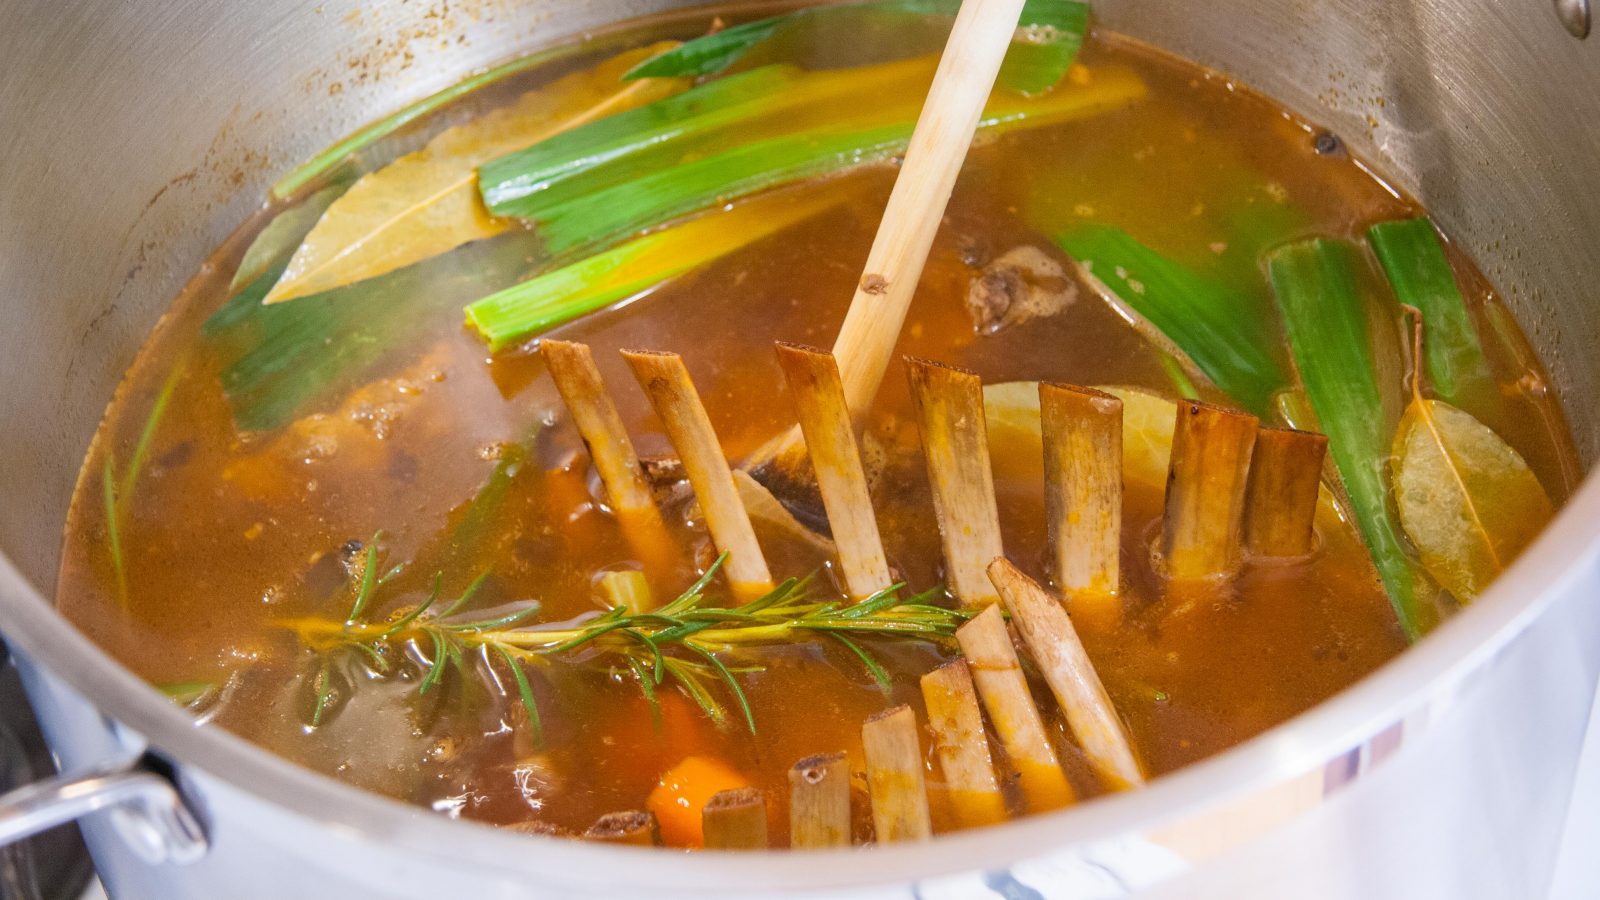 Lamb stock: step by step recipe - Cookovery